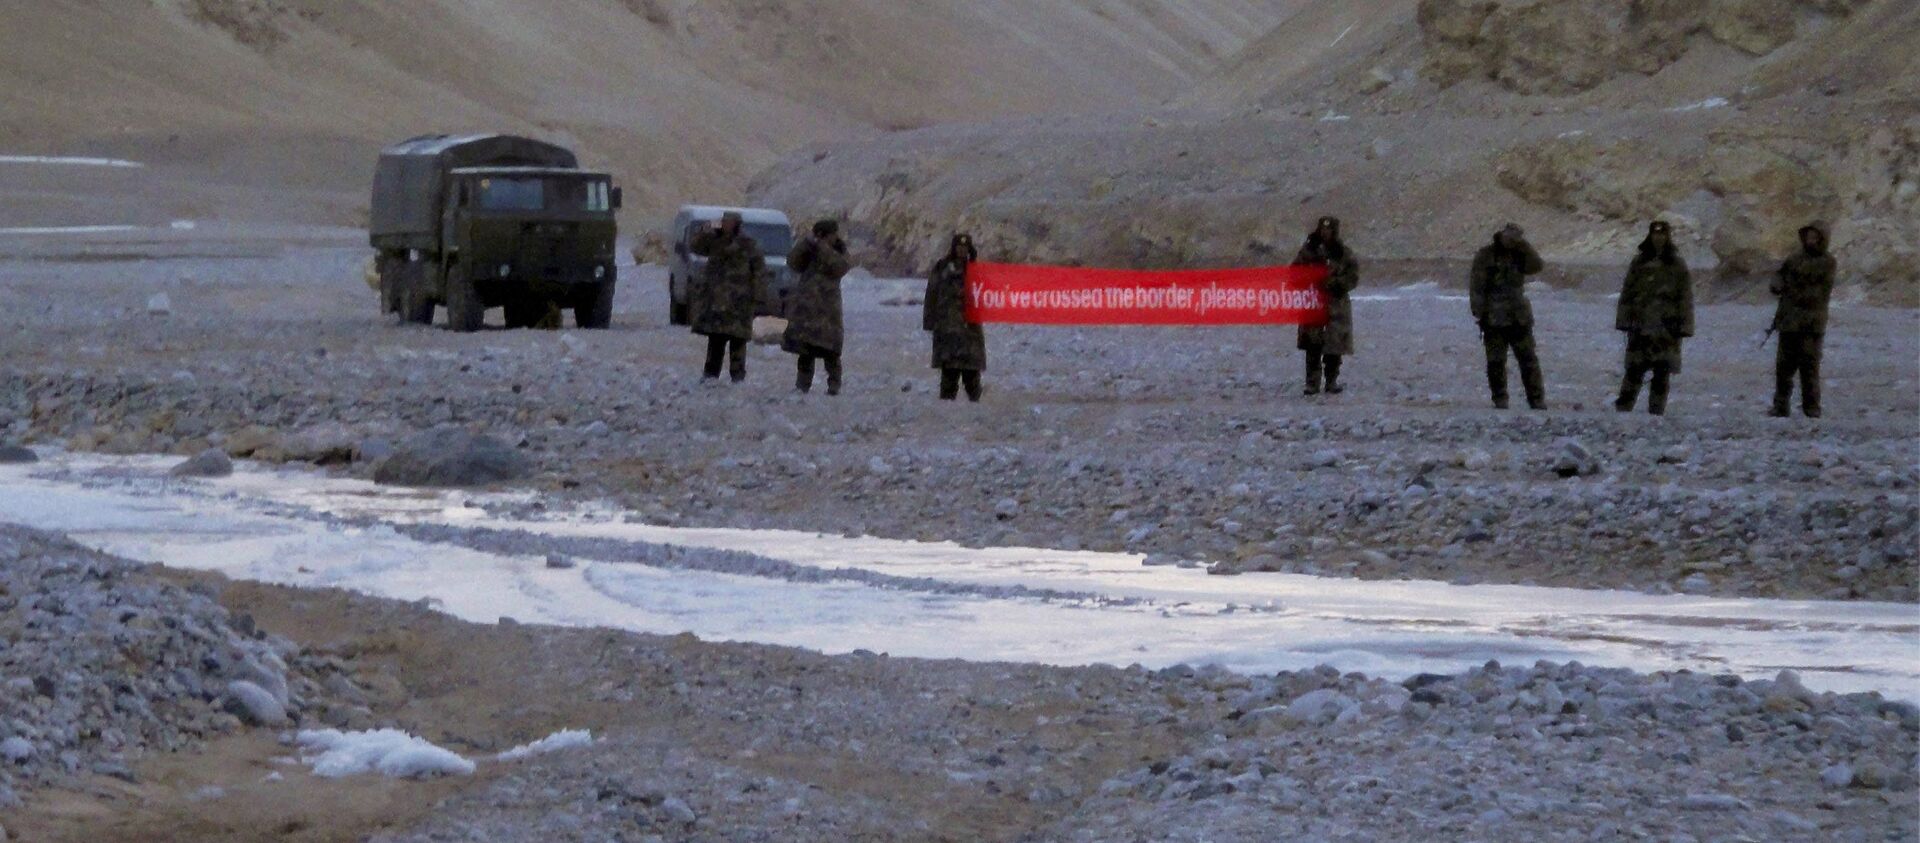 (File) In this May 5, 2013 file photo, Chinese troop hold a banner which reads, You've crossed the border, please go back, in Ladakh, India - Sputnik International, 1920, 28.01.2021